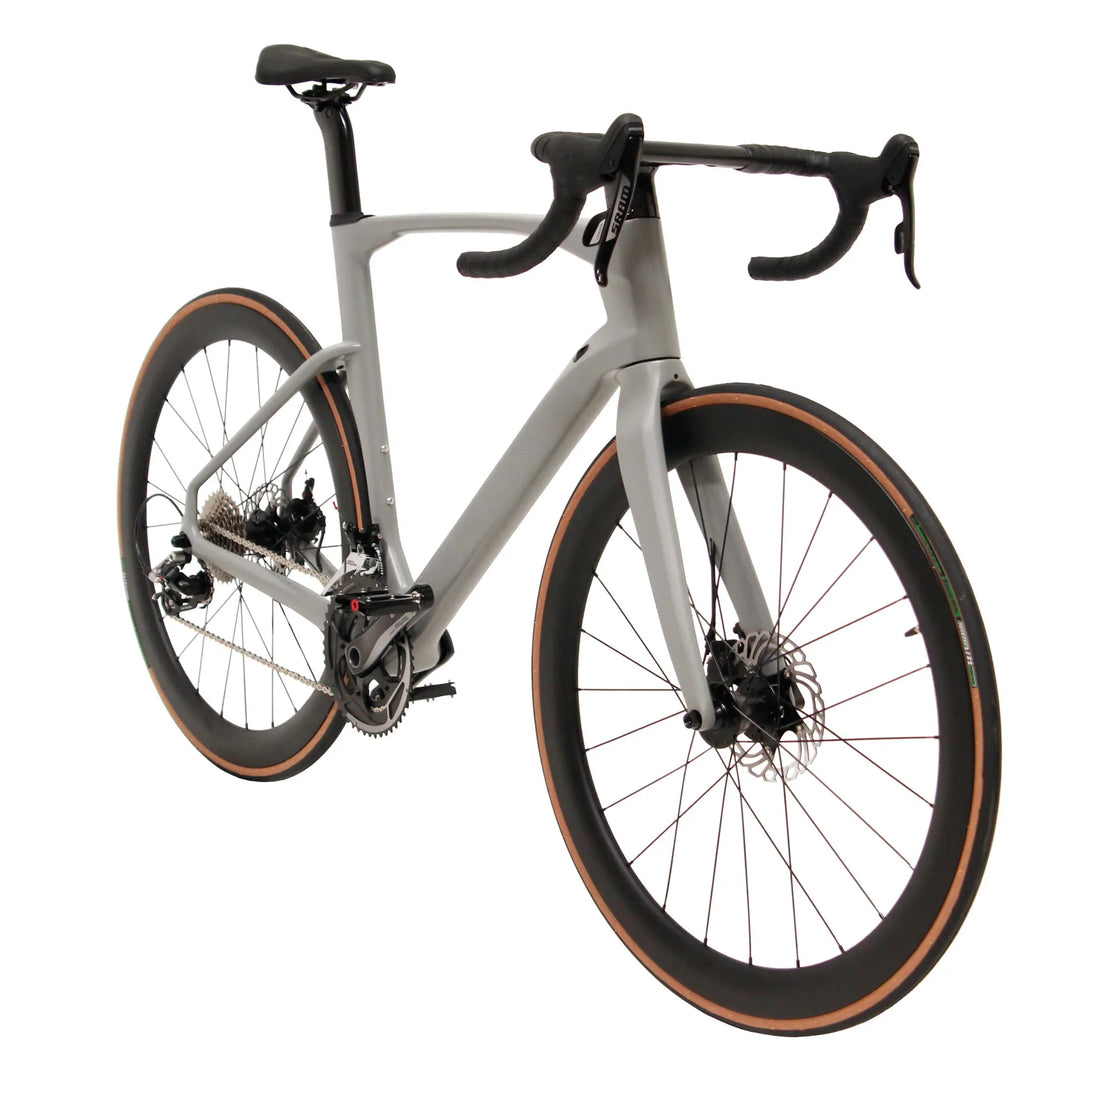 Model A – Carbon Frame Road Bike with SRAM Rival 22s and carbon wheels